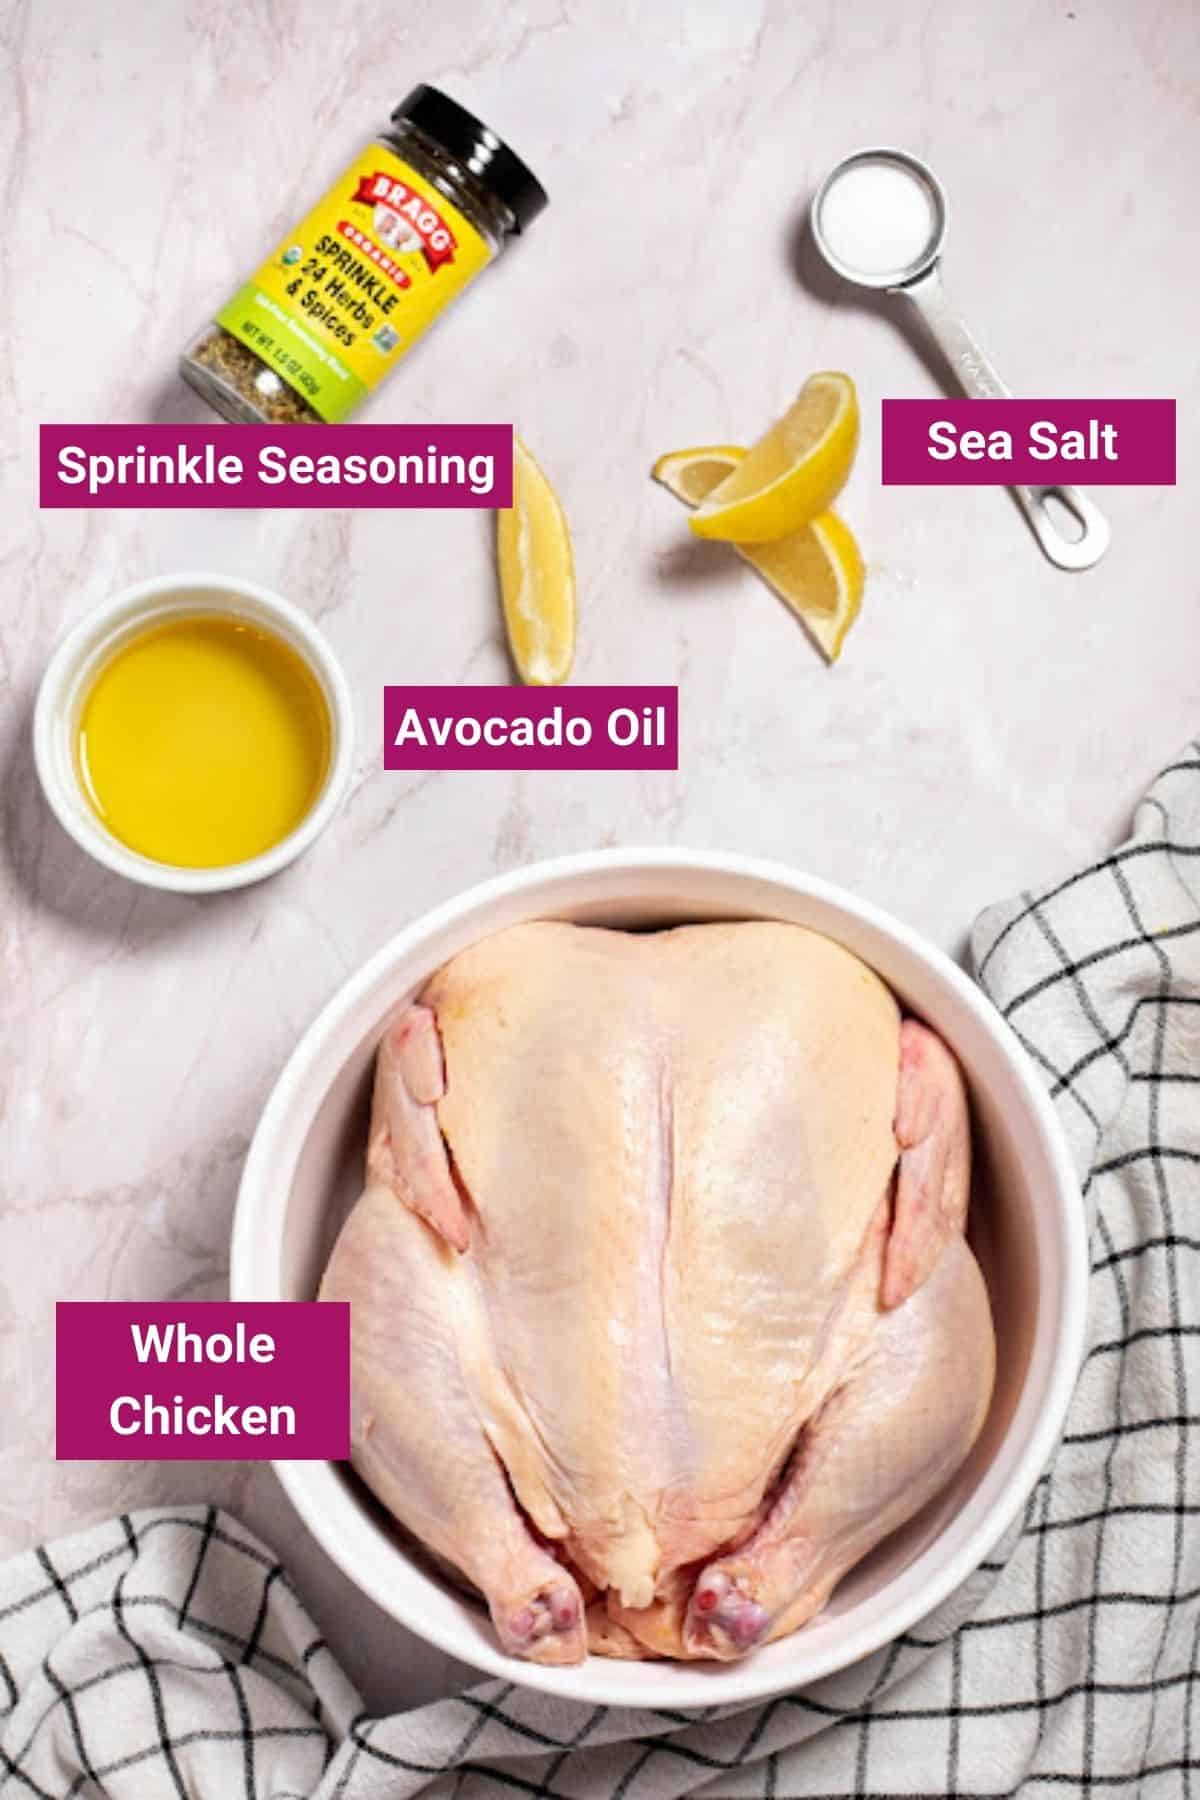 Overhead view of the labeled ingredients for air fryer roasted chicken: a bowl with a whole, raw chicken, a bowl of avocado oil, a jar of sprinkle seasoning, and a measuring spoon of sea salt, next to some lemon slices